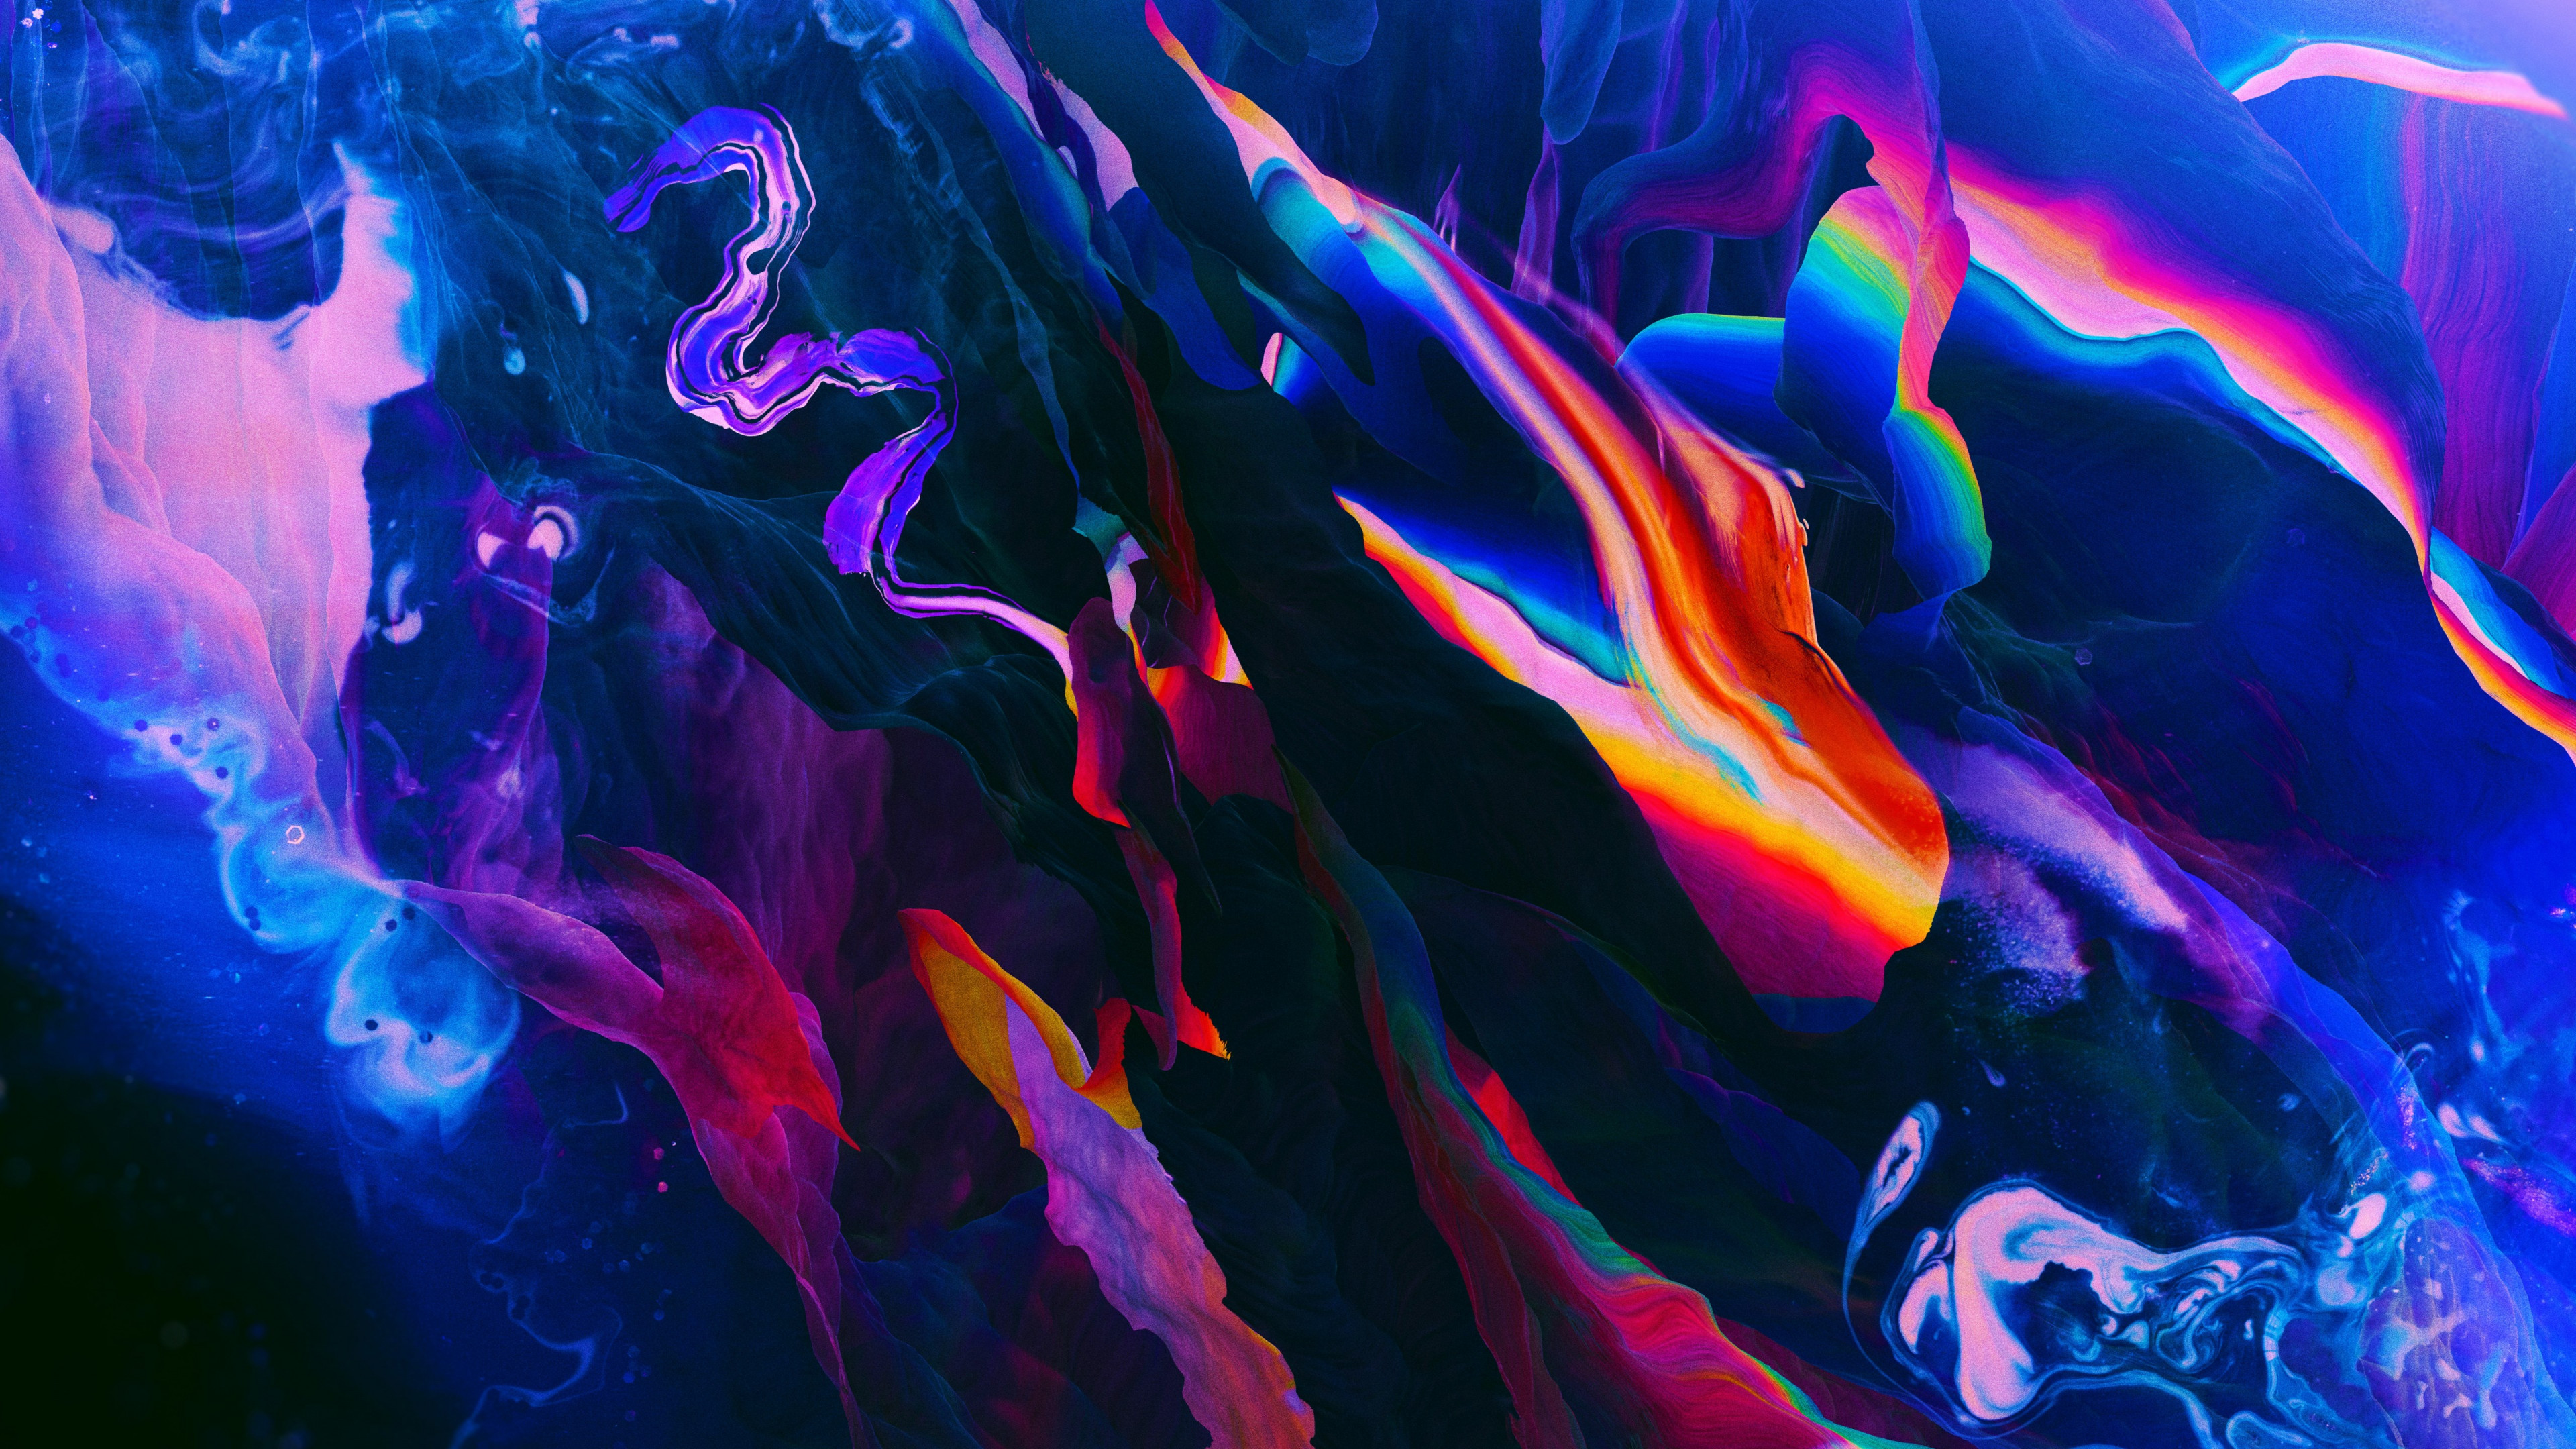 abstract-colorful-5k-wallpaper-3840x2160_577747-mm-90.jpg